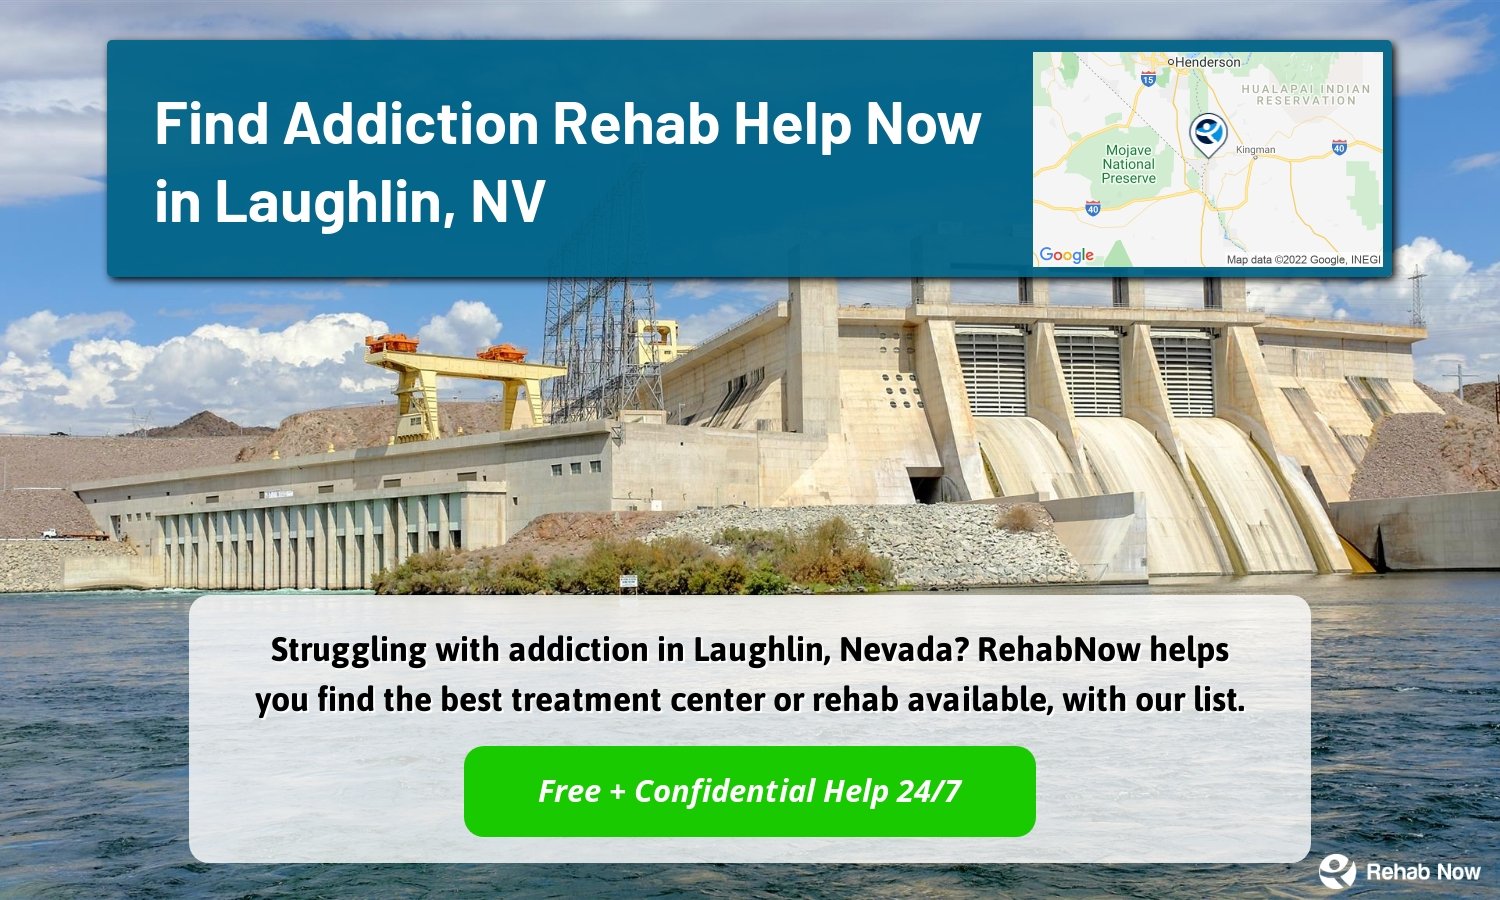 Struggling with addiction in Laughlin, Nevada? RehabNow helps you find the best treatment center or rehab available, with our list.